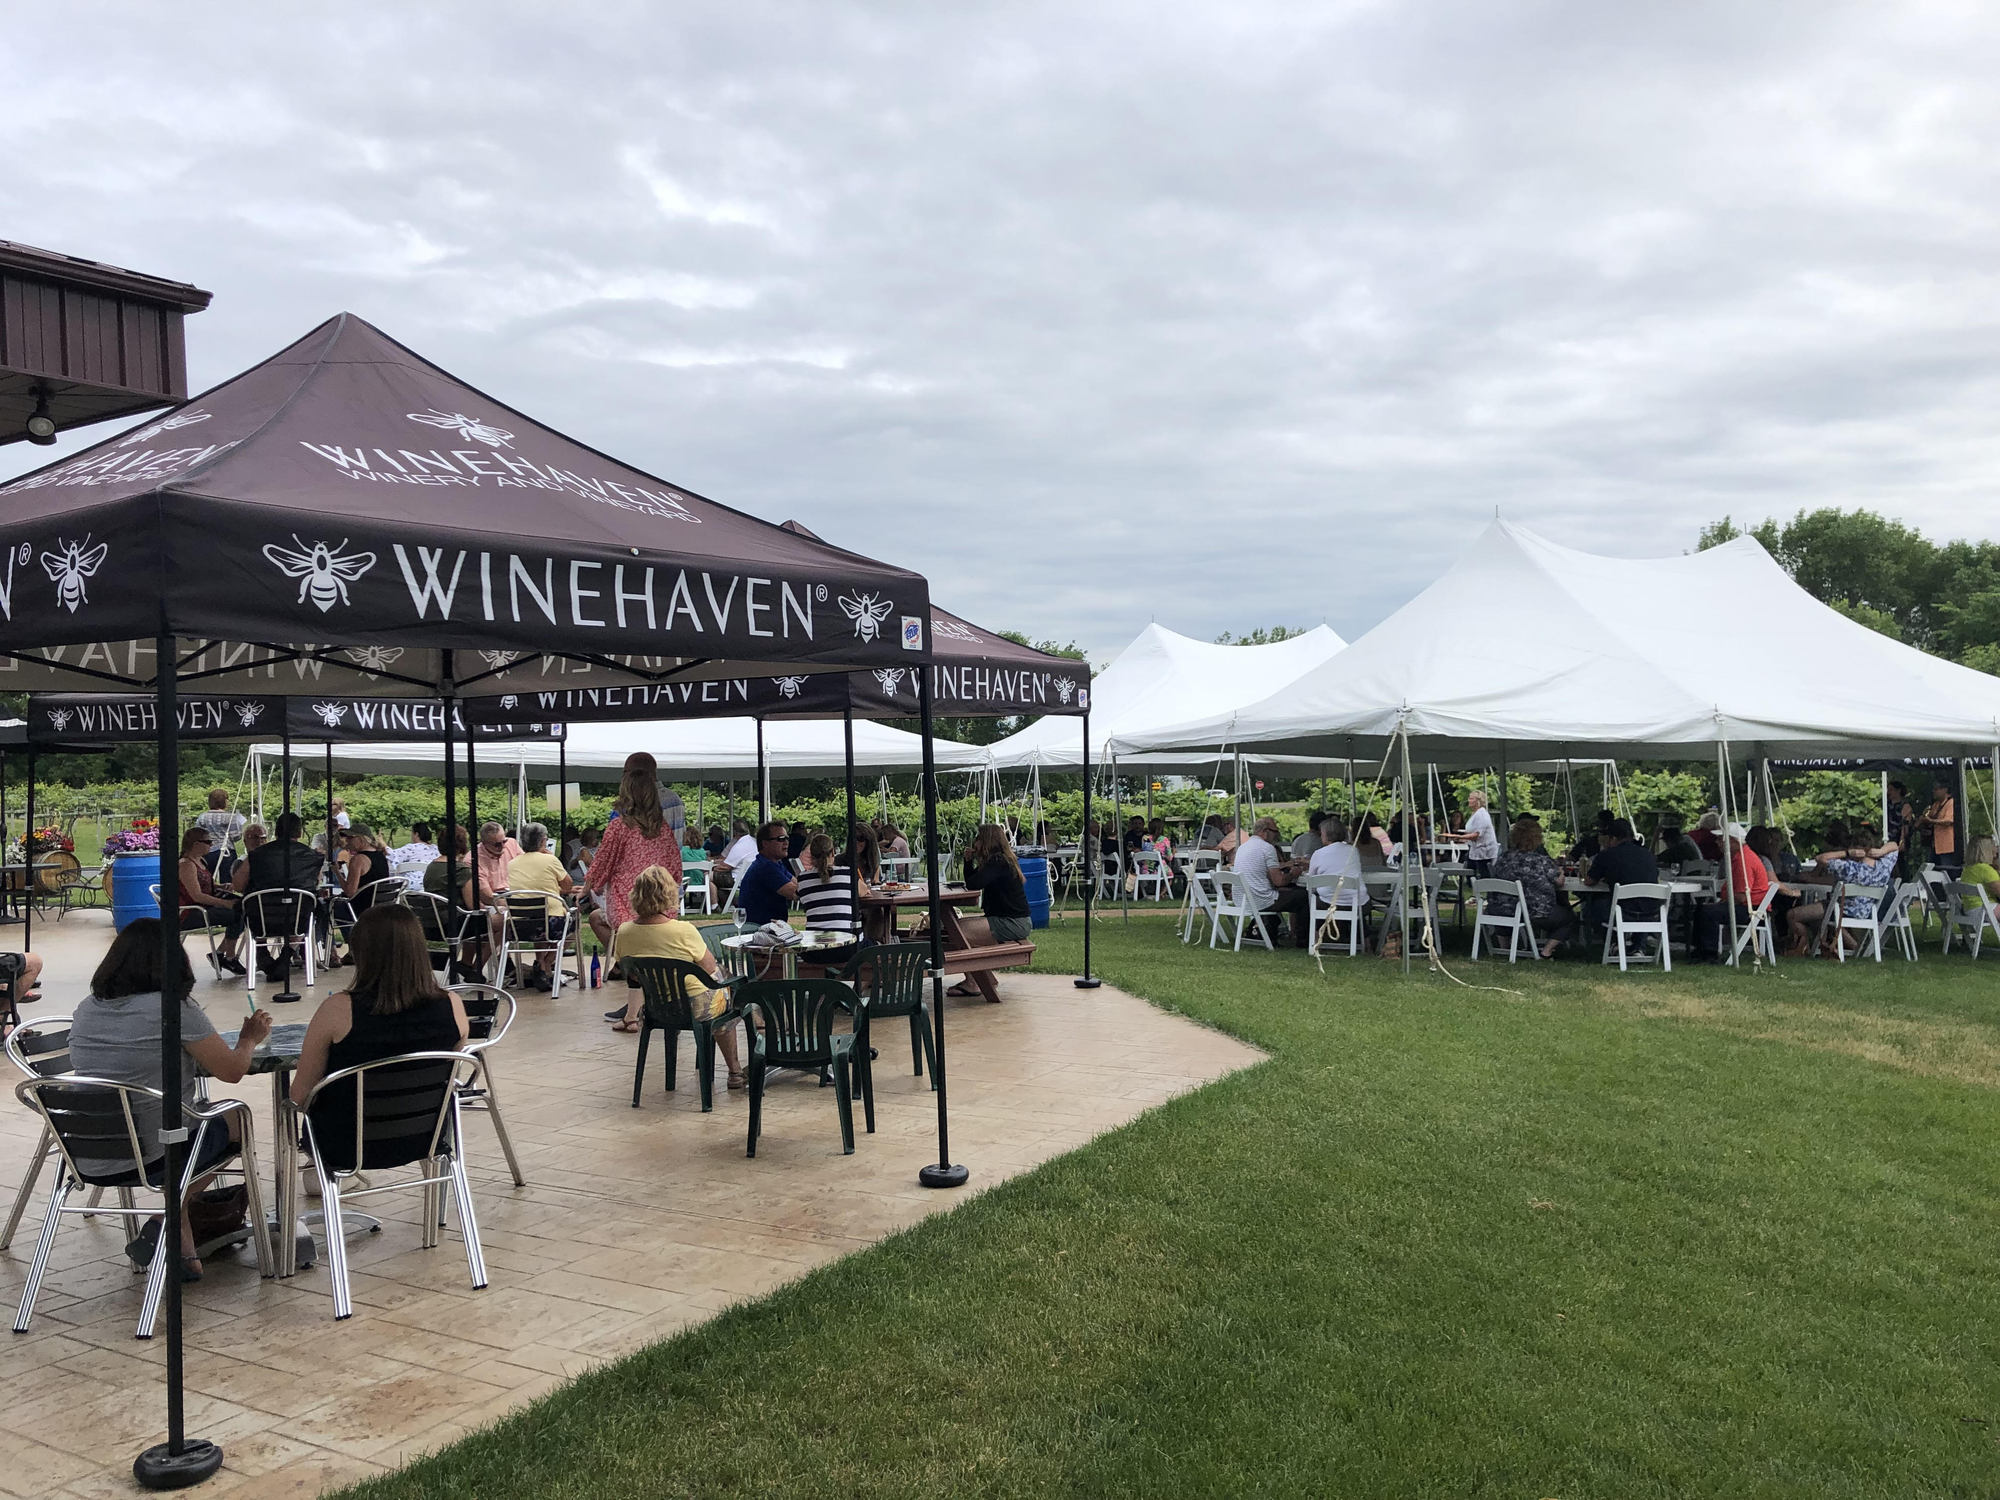 Winehaven Winery in Chisago City, Minn., welcomes the “sit-down model” of wine tastings.